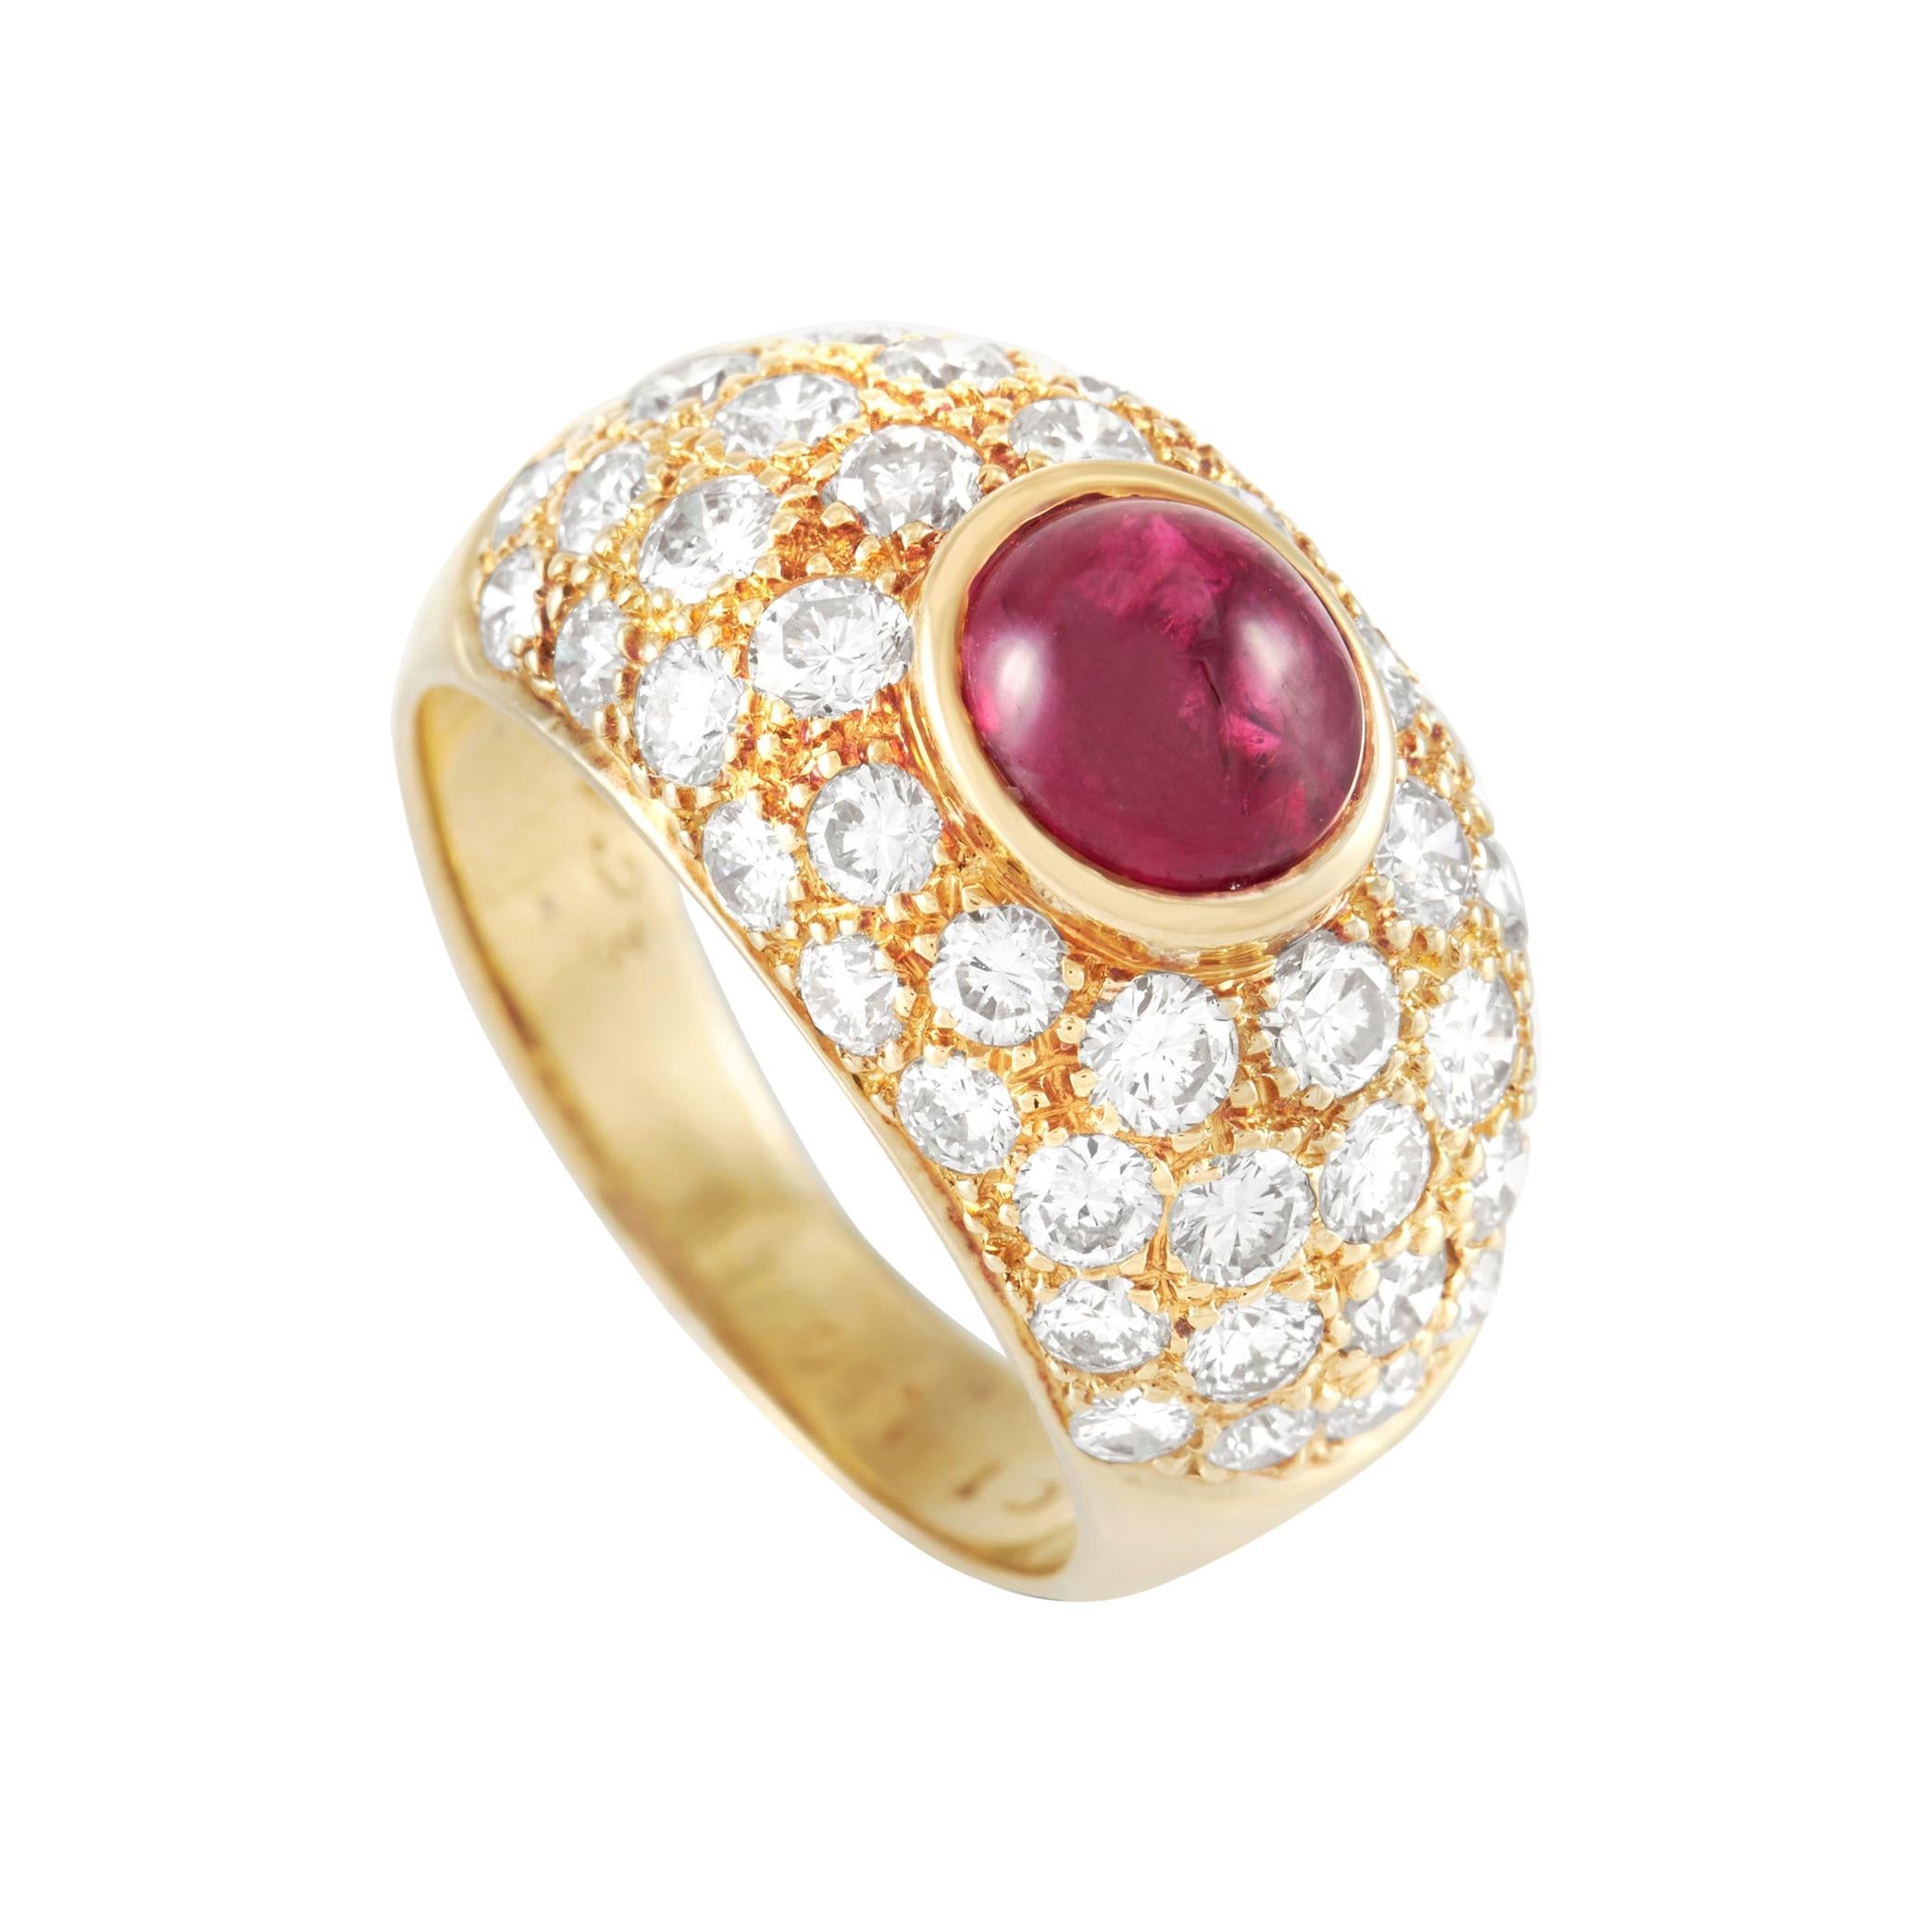 LB Exclusive 18k Yellow Gold 2.23 Ct Diamond and 1.90 Ct Ruby Ring